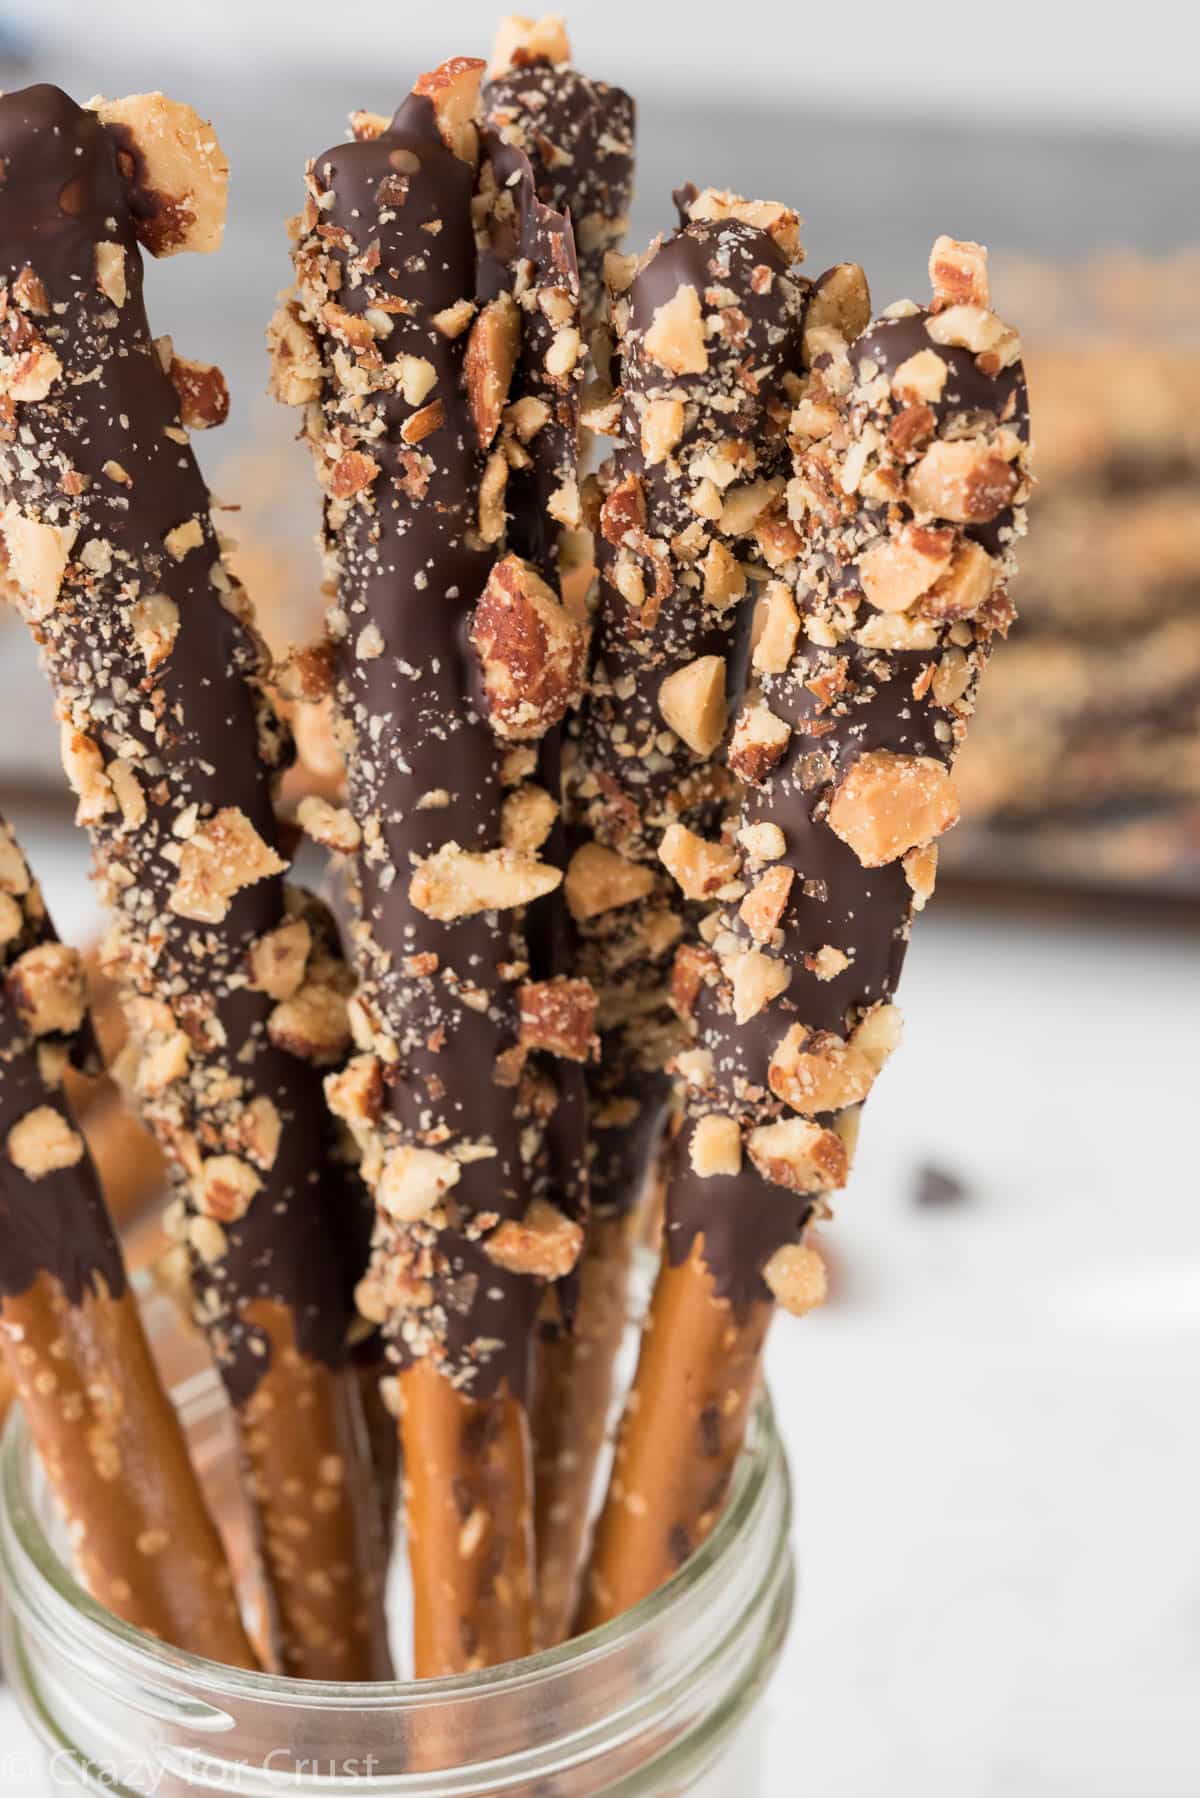 Dark Chocolate Almond Dipped Pretzels - this easy recipe is perfect for parties or homemade gifts for the holidays! The chocolate, almonds, and pretzels are a great flavor combination.